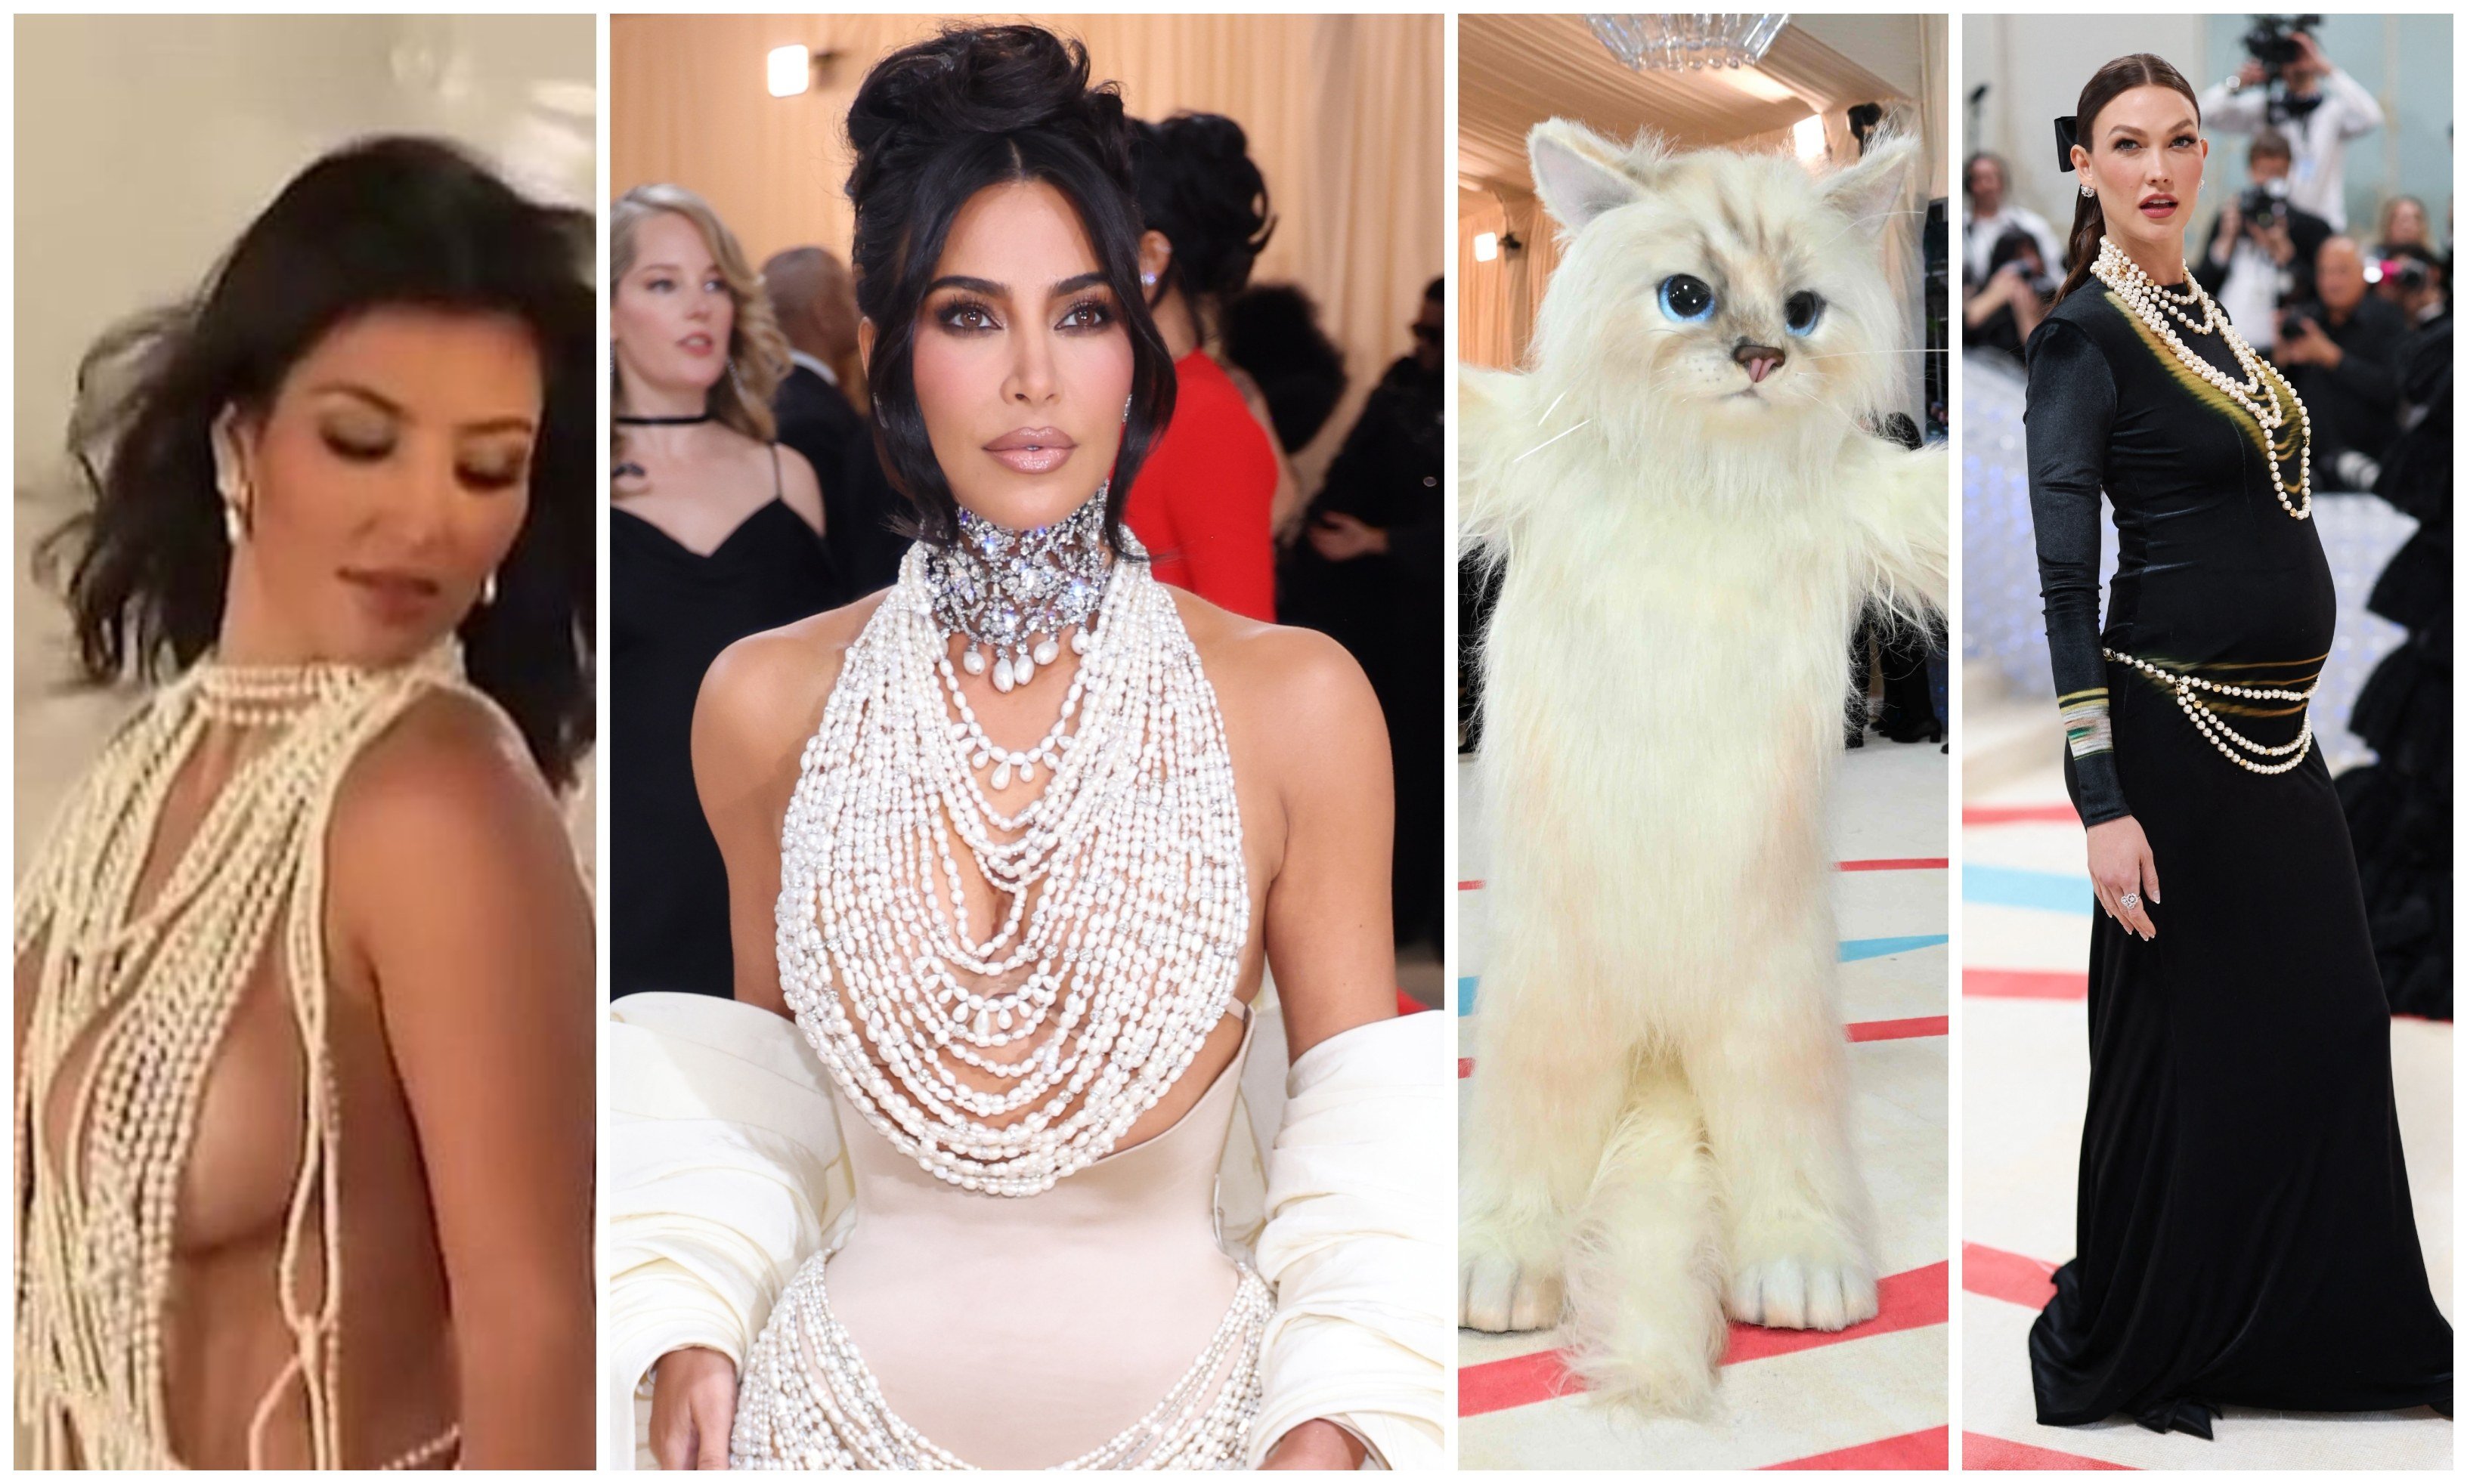 Kim Kardashian wore a Playboy throwback look with pearls, Jared Leto showed up in a cat suit and Karlie Kloss revealed her pregnancy at the Met Gala, fashion’s biggest night in the US. Photos: EPA-EFE, AFP, Reuters